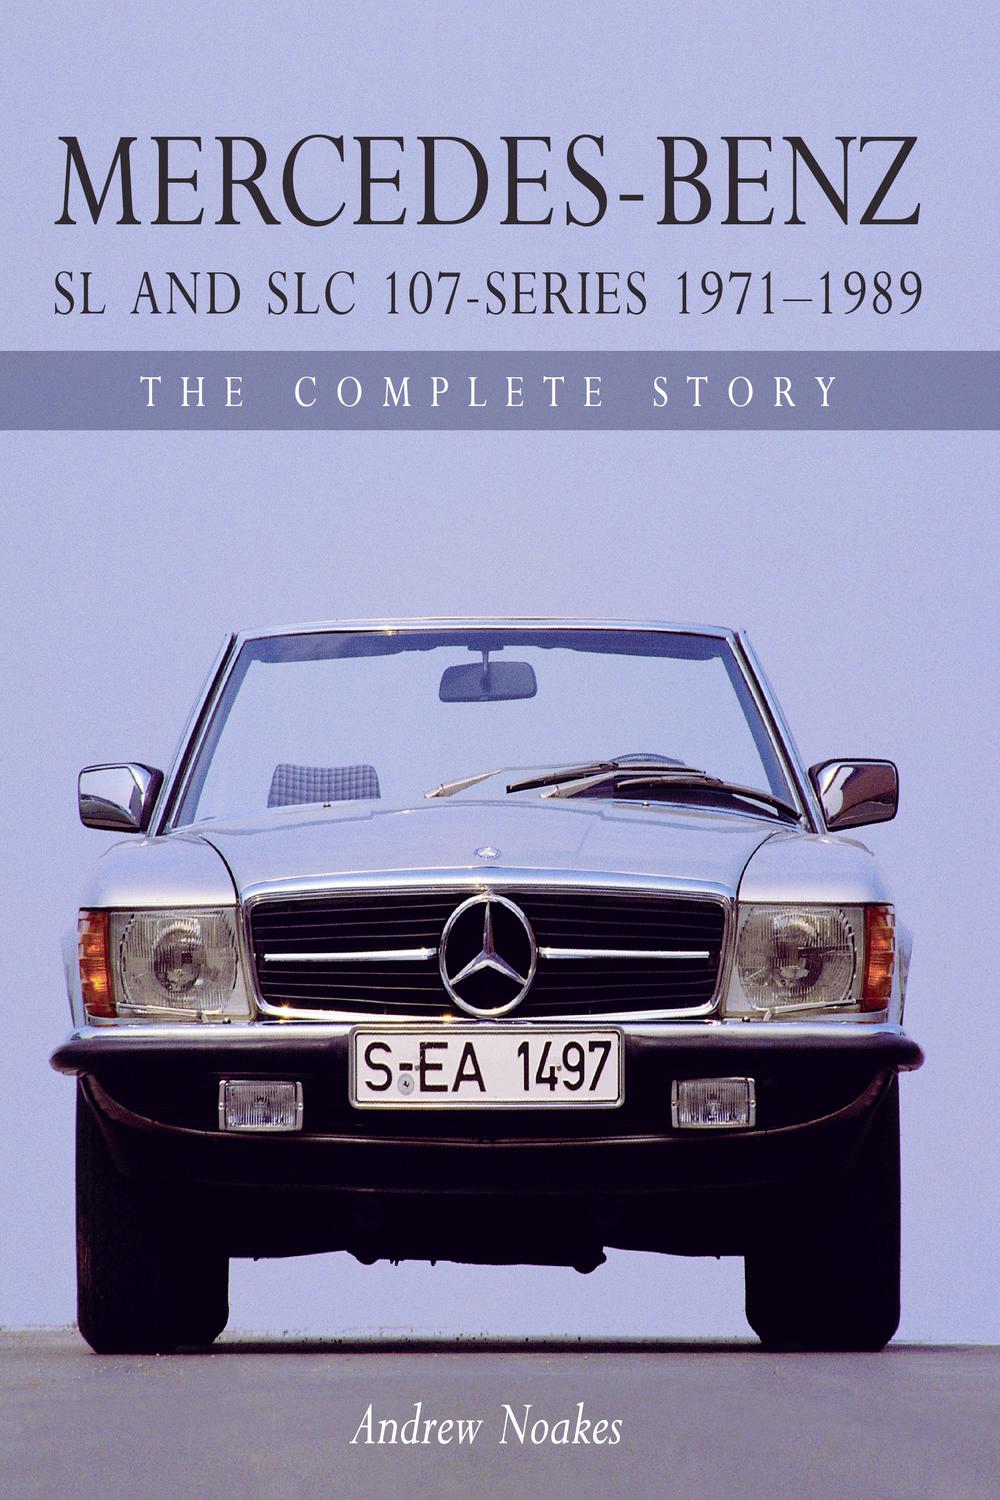 Mercedes-Benz SL and SLC 107-Series 1971-1989 - Andrew Noakes,,